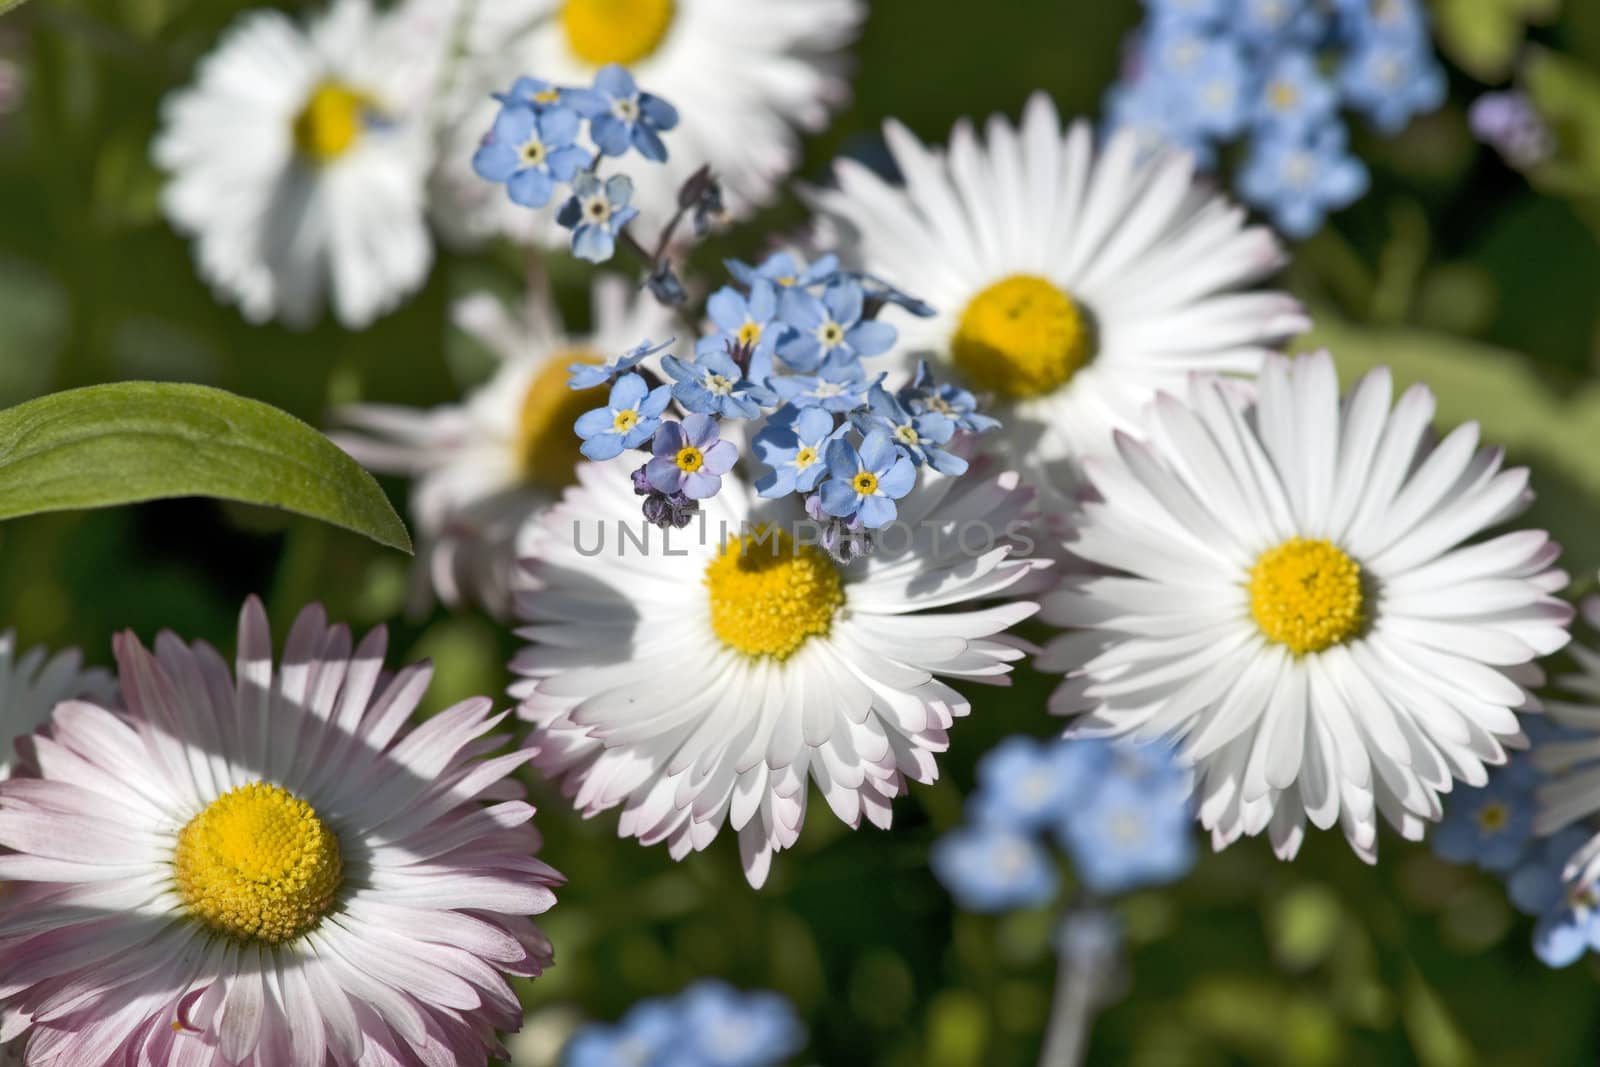 Pink daisies and forget-me-not flowers by mulden